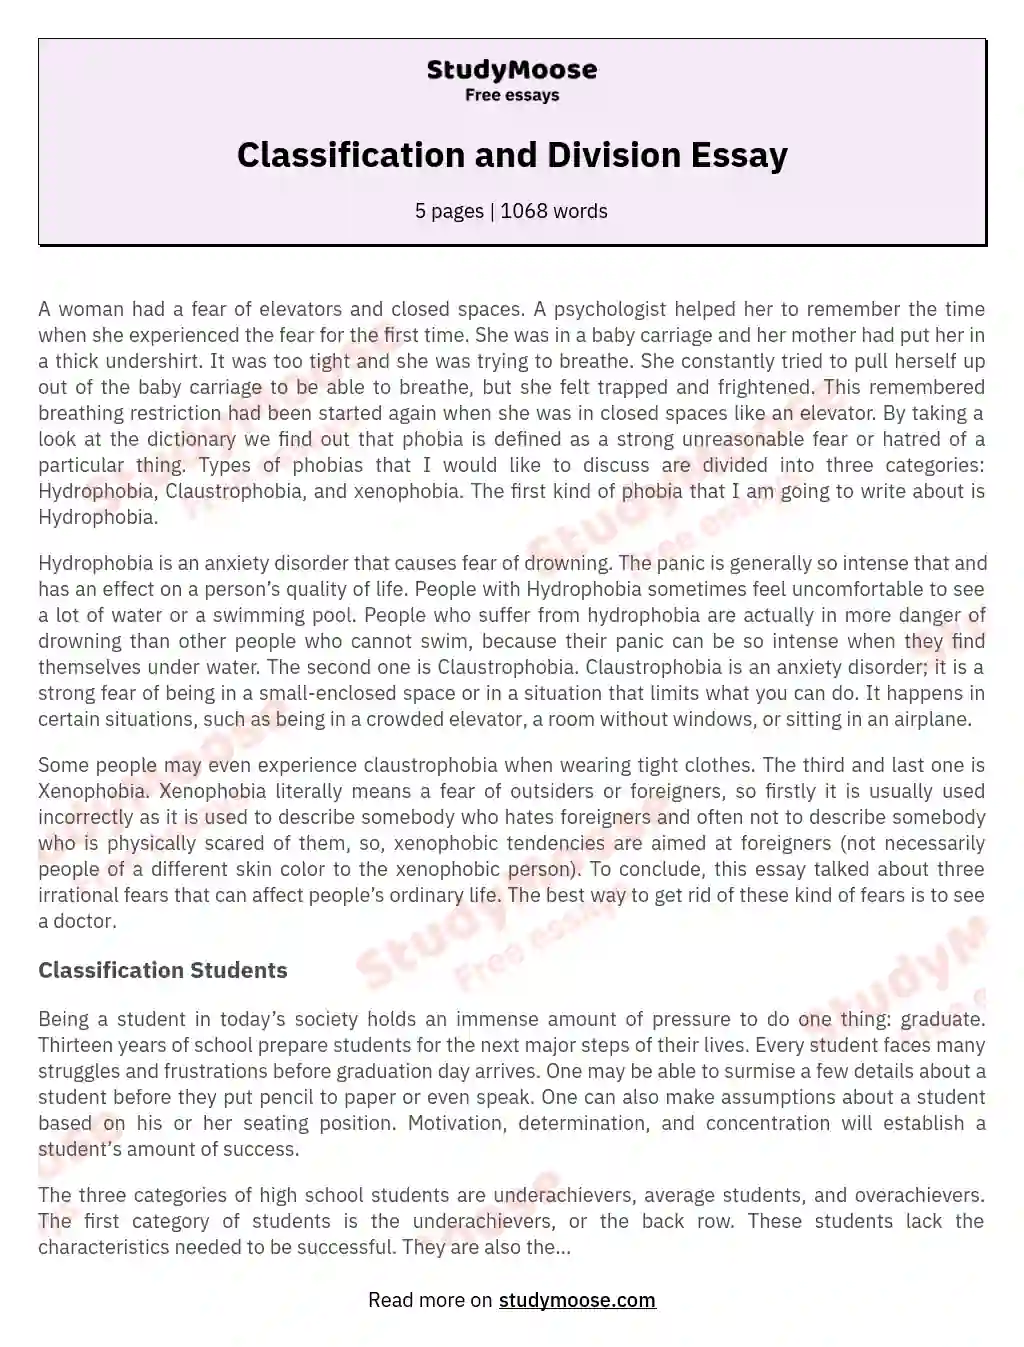 Classification and Division Essay essay